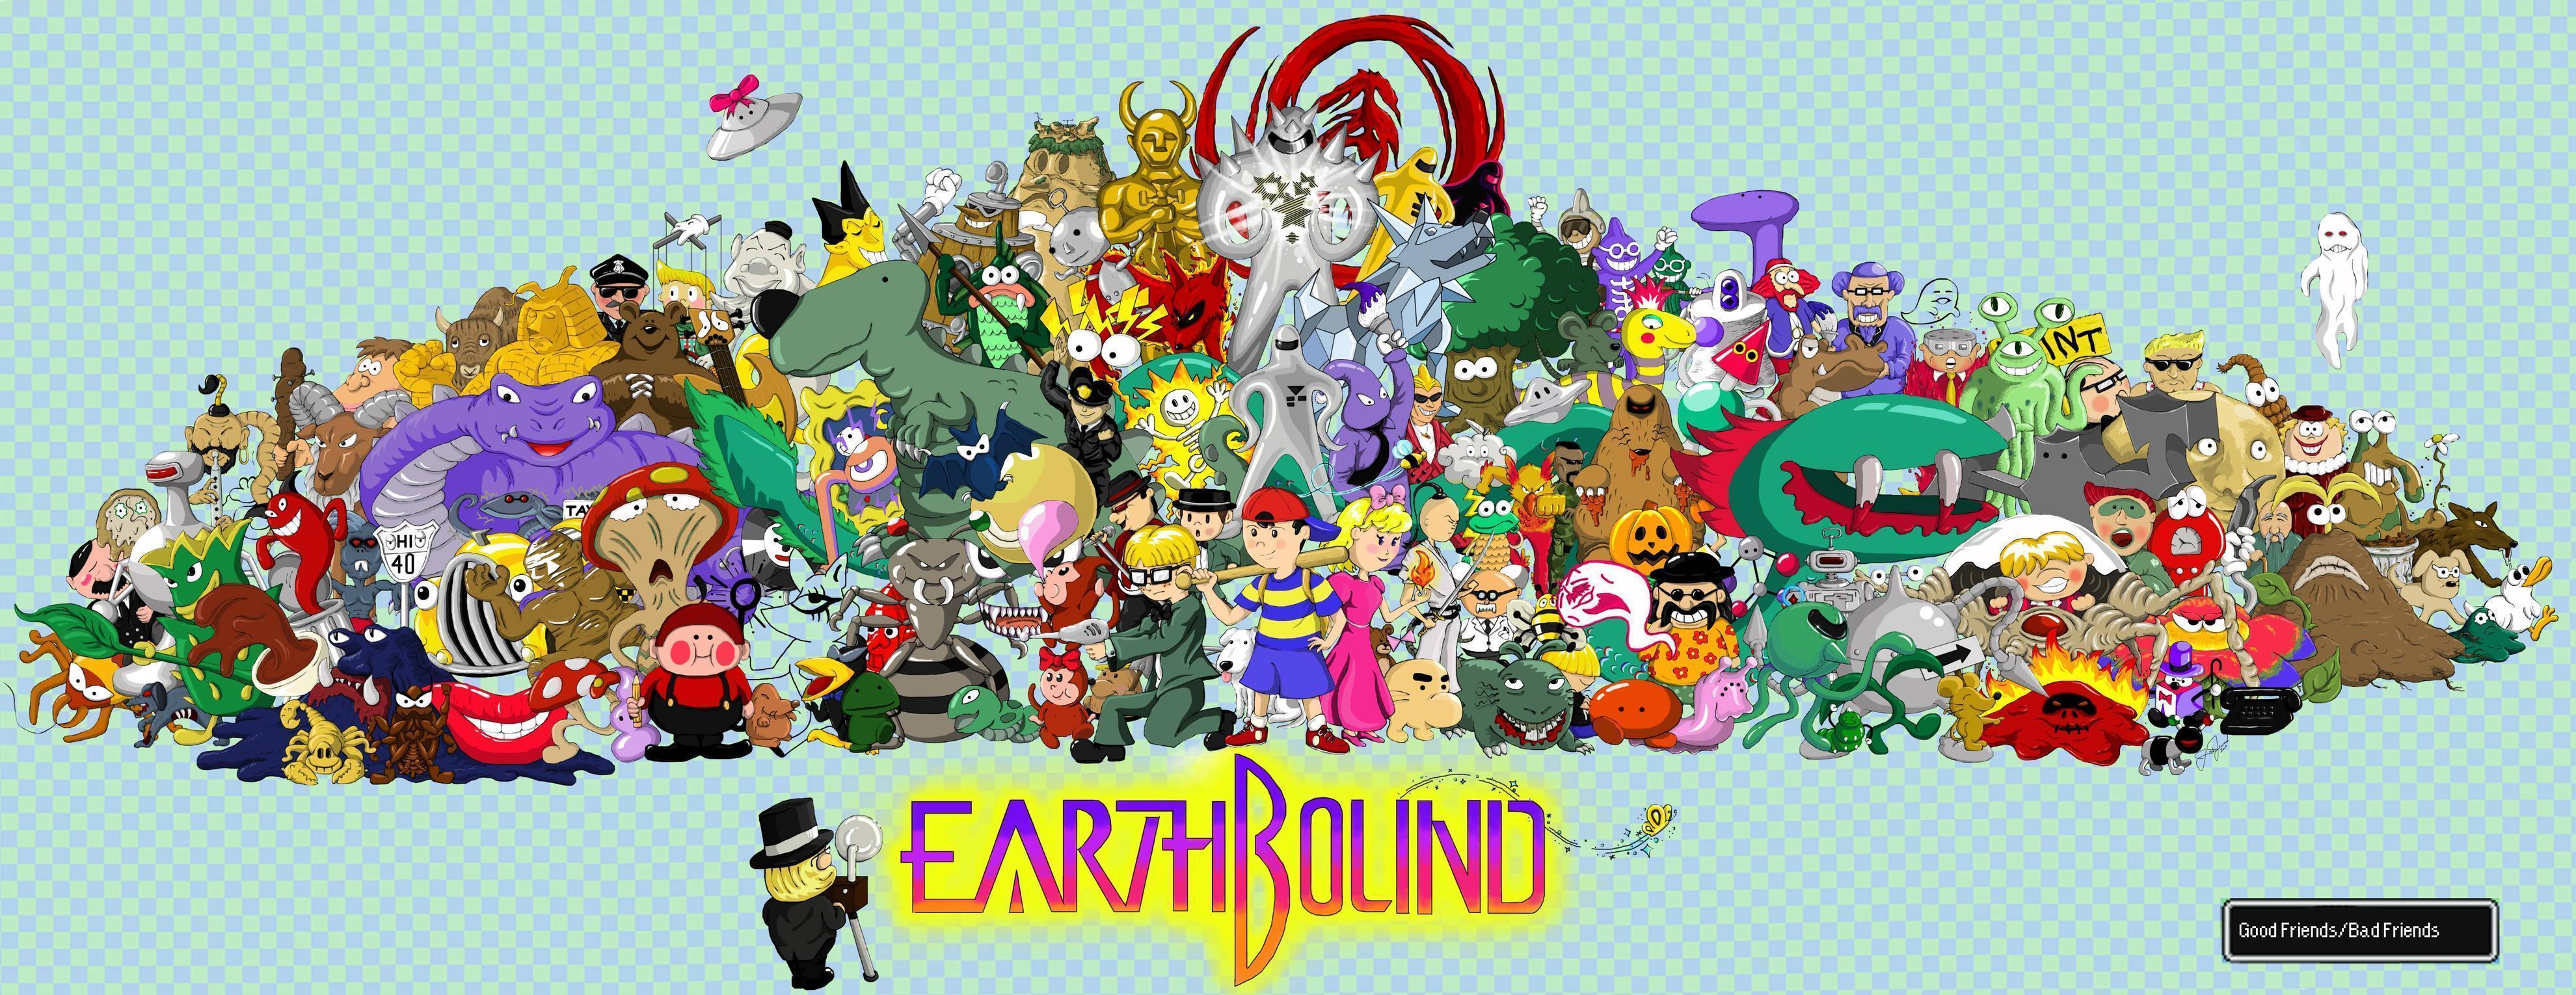 Video Game EarthBound HD Wallpaper